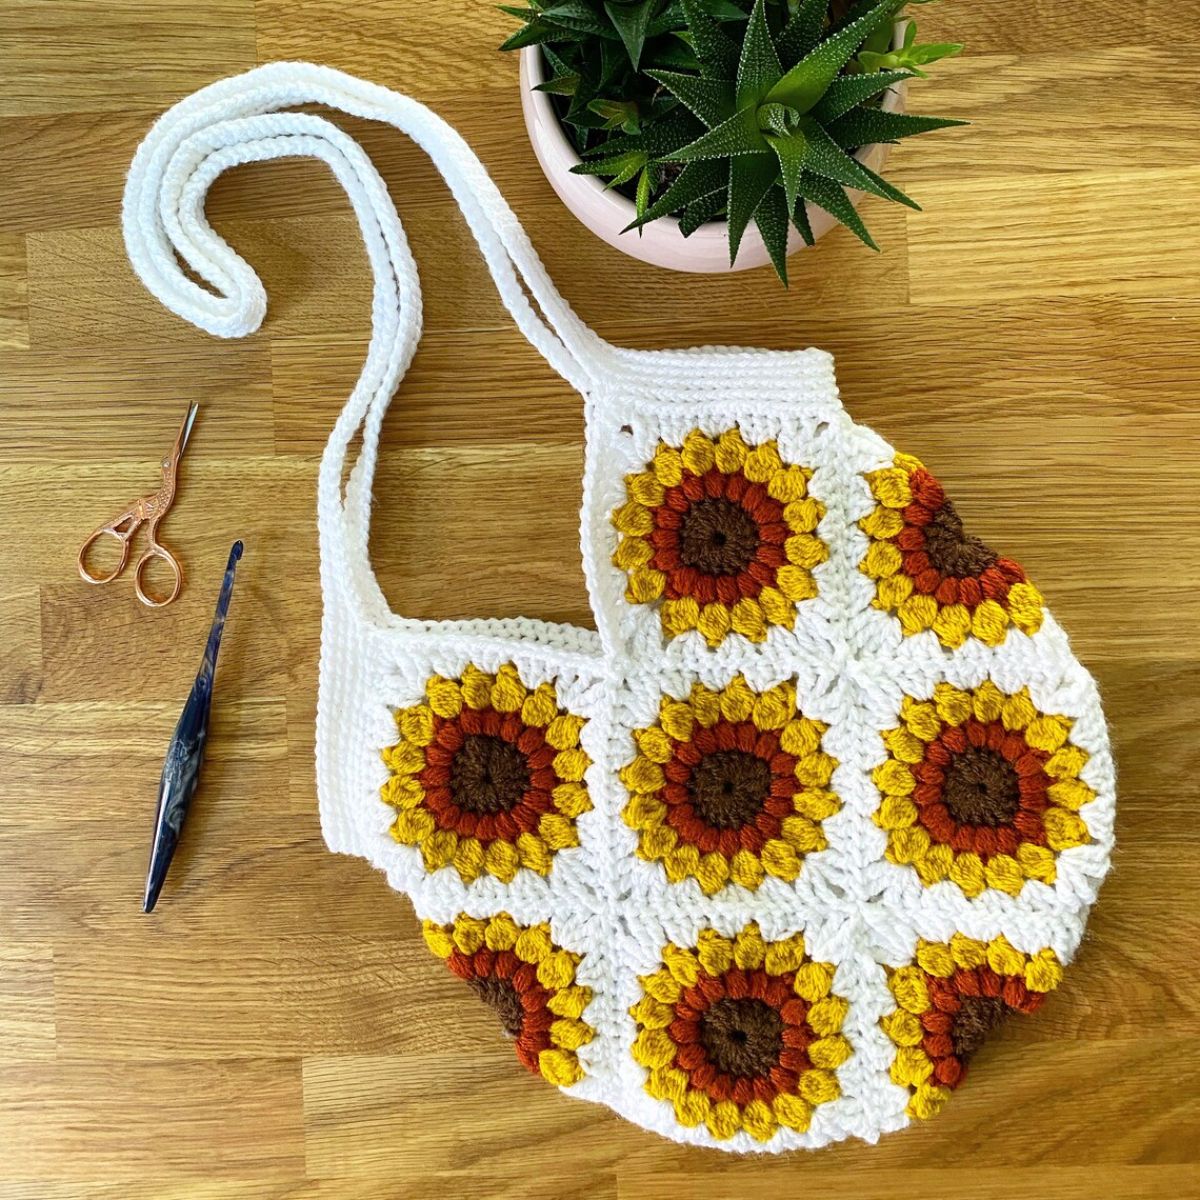  White granny square style crochet bag with sunflower design and long white handles on a wooden floor. 